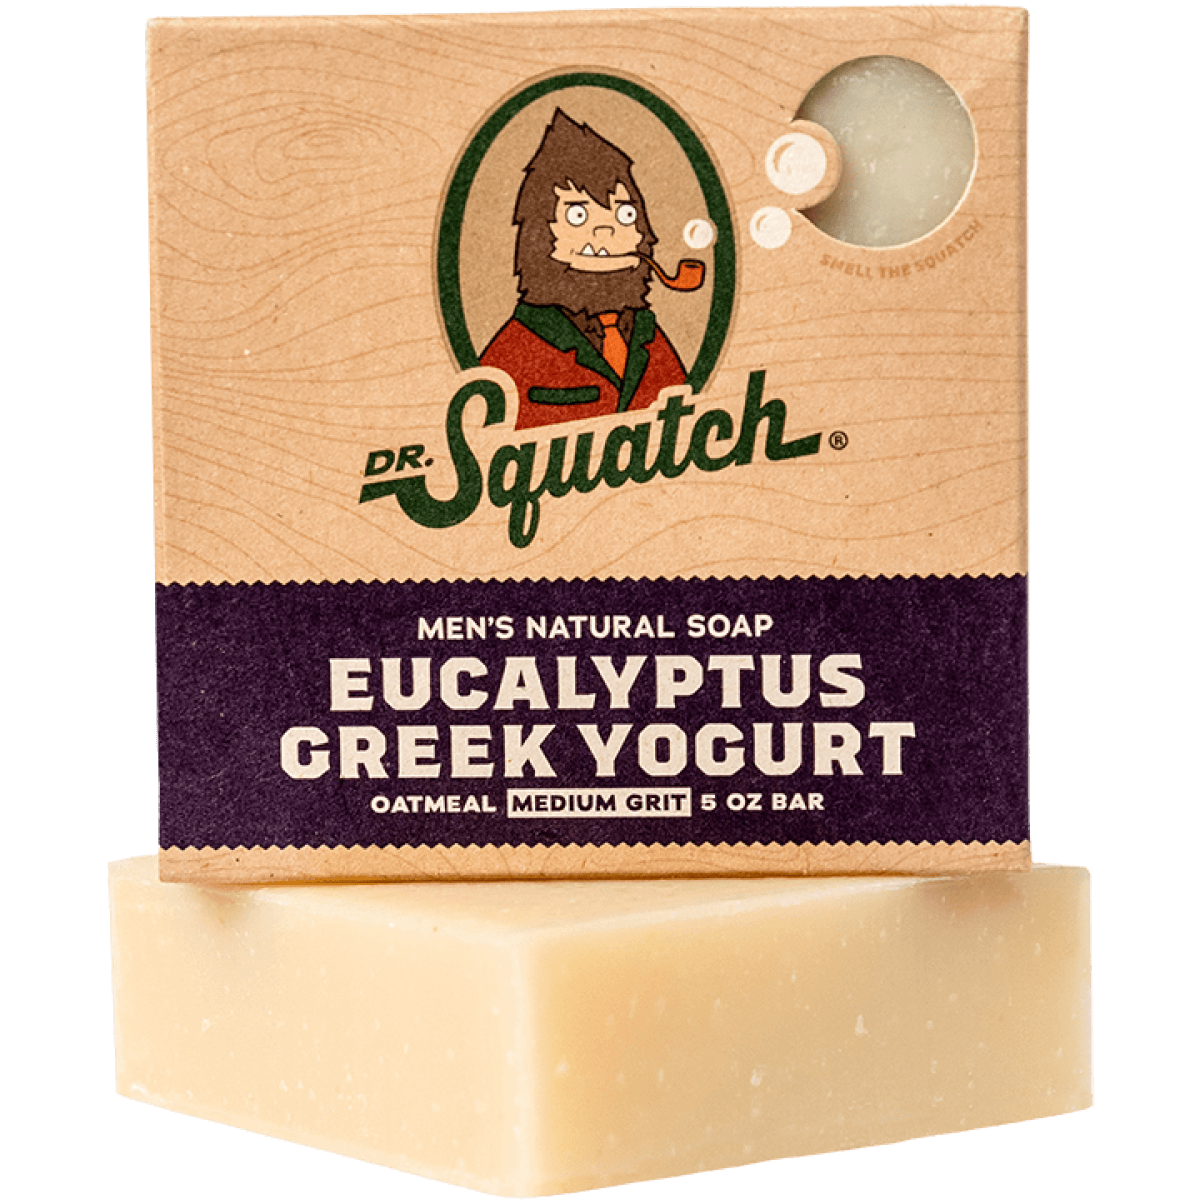 Dr. Squatch Soap Save Fan Made ~ Extend Your Soap's Life 3X ~ Many Colors!